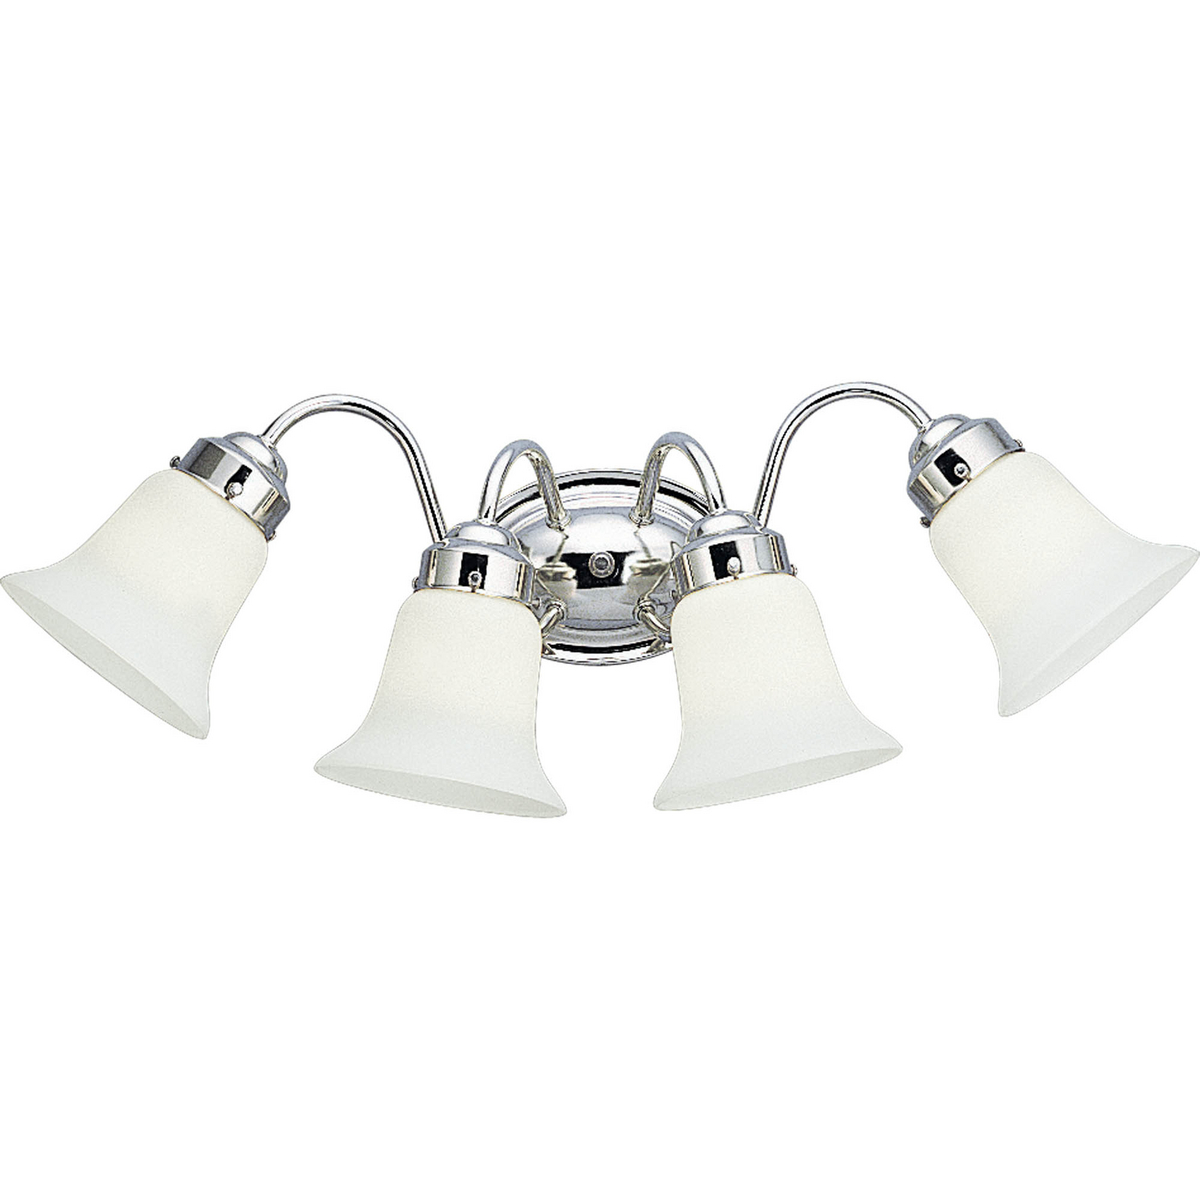 Classic metallic four-light fixture paired with pristine white opal glass. Timeless in its vintage appeal, this light is stylish for both new and restored homes.